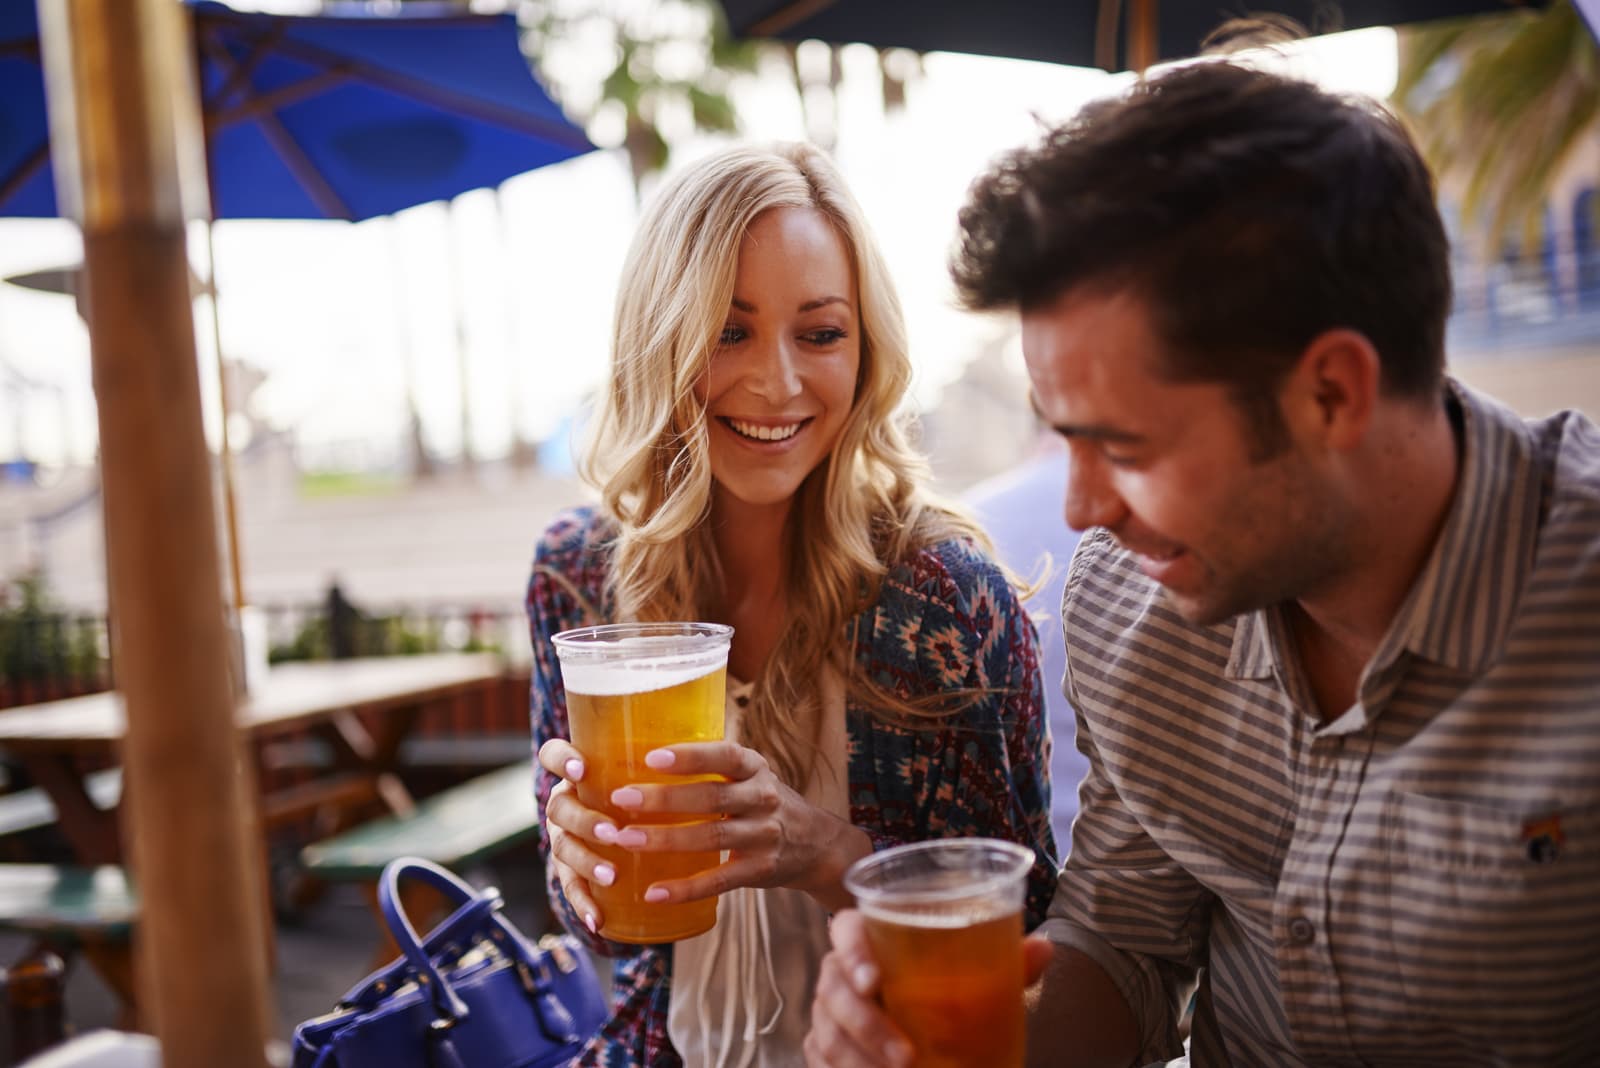 romantic couple drinking beer at outdoor restaurant